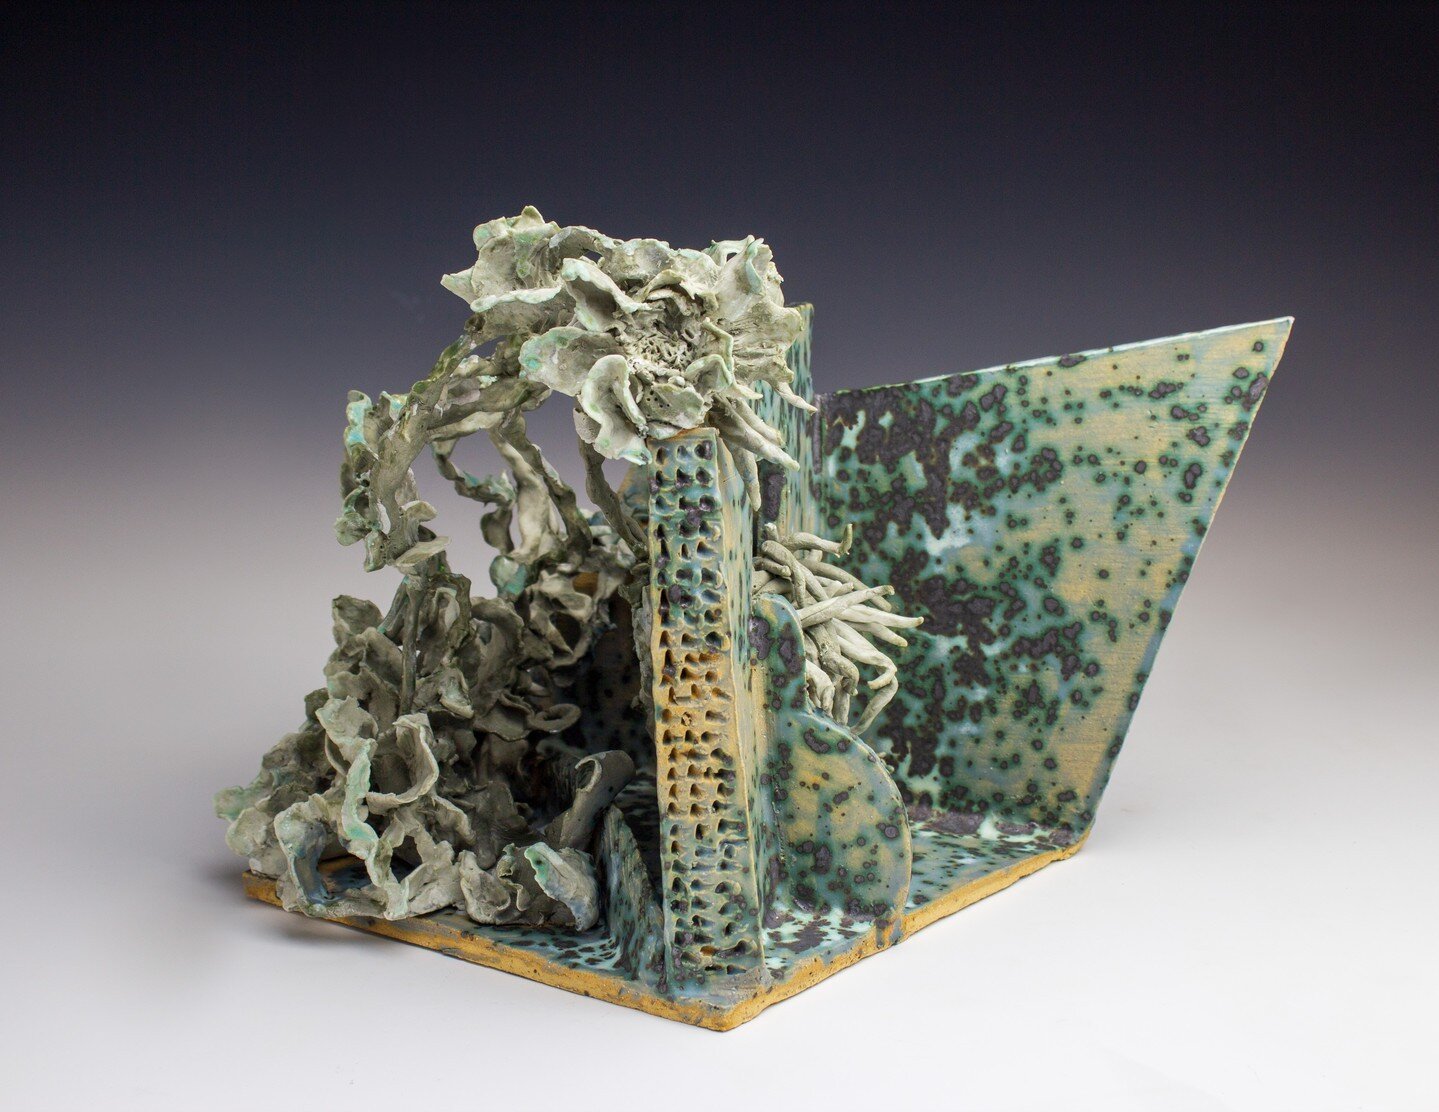 Hiraeth| Colored porcelain and stoneware with glaze | 13.5&quot; x 13.75&quot; x 9&quot;|2022 The Welsh word hiraeth describes a deeply felt connection to one&rsquo;s homeland and casts its wood and hills in an almost magical glow.
It is rather a yea